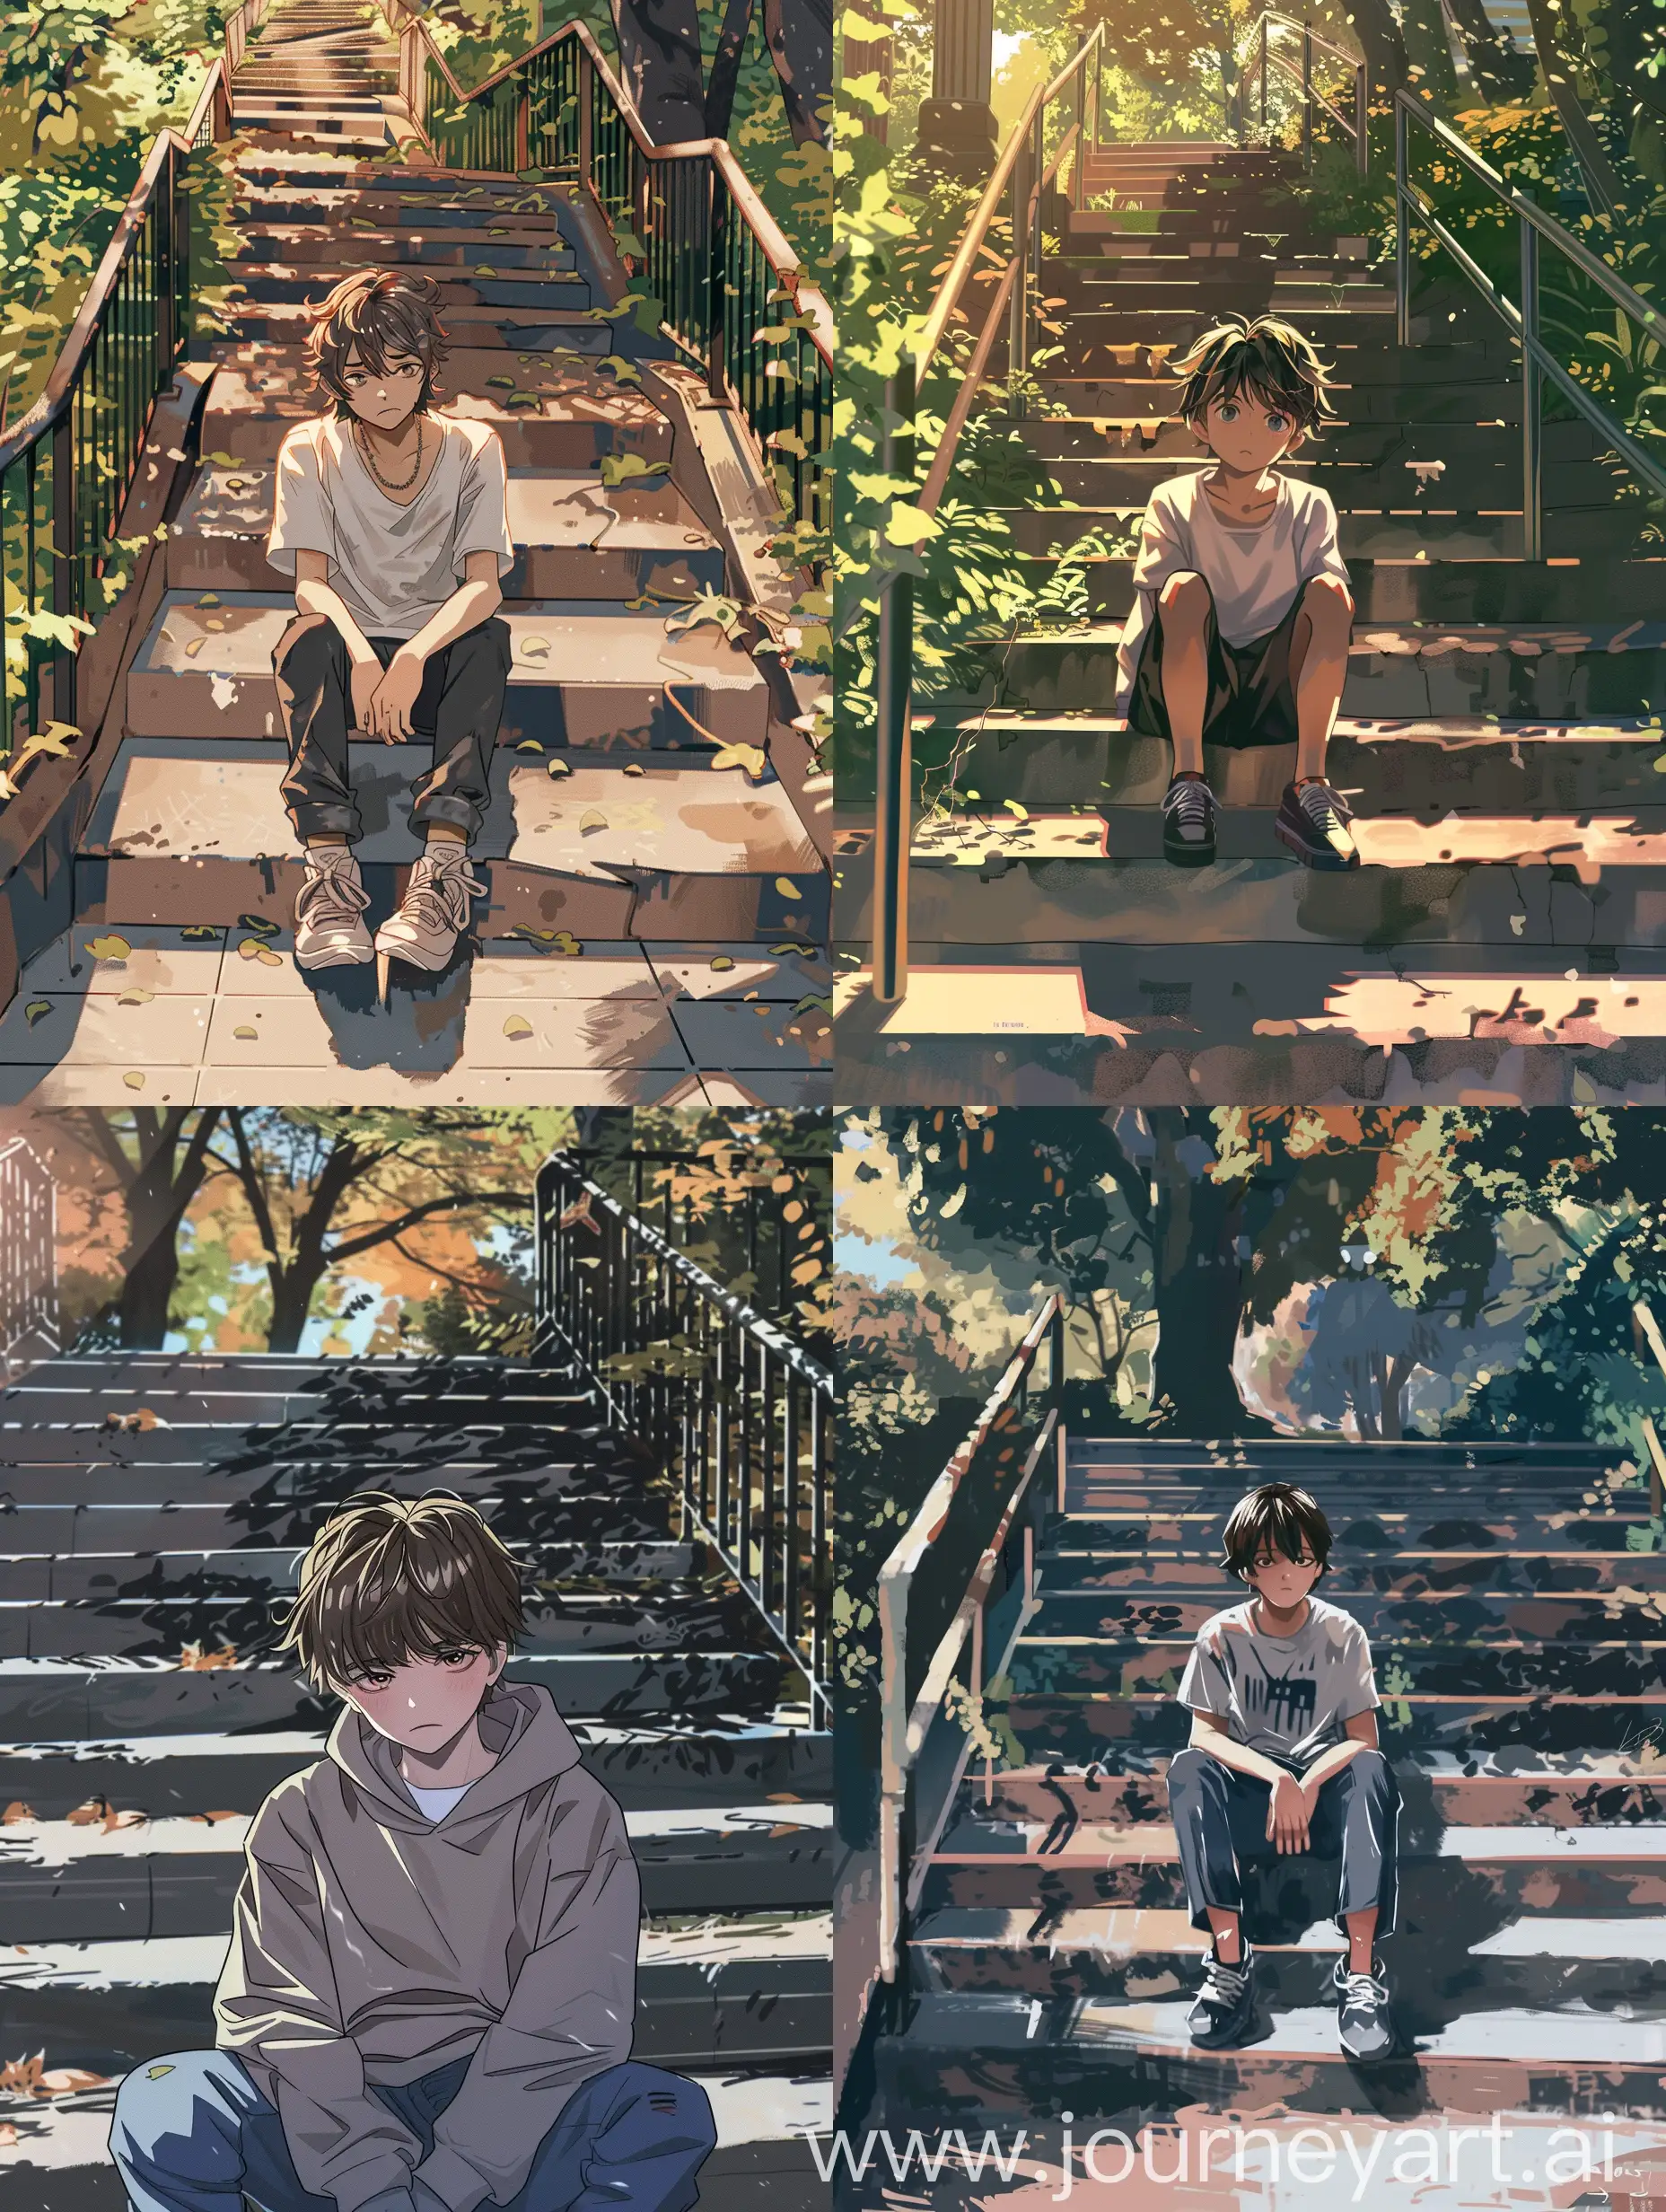 Anime style,shojo style, a 15 year old boy sitting near on stairs of a park,he has a bored expression, copy the anime style--https://images.app.goo.gl/8VrnXvt94up3XTcT8---  